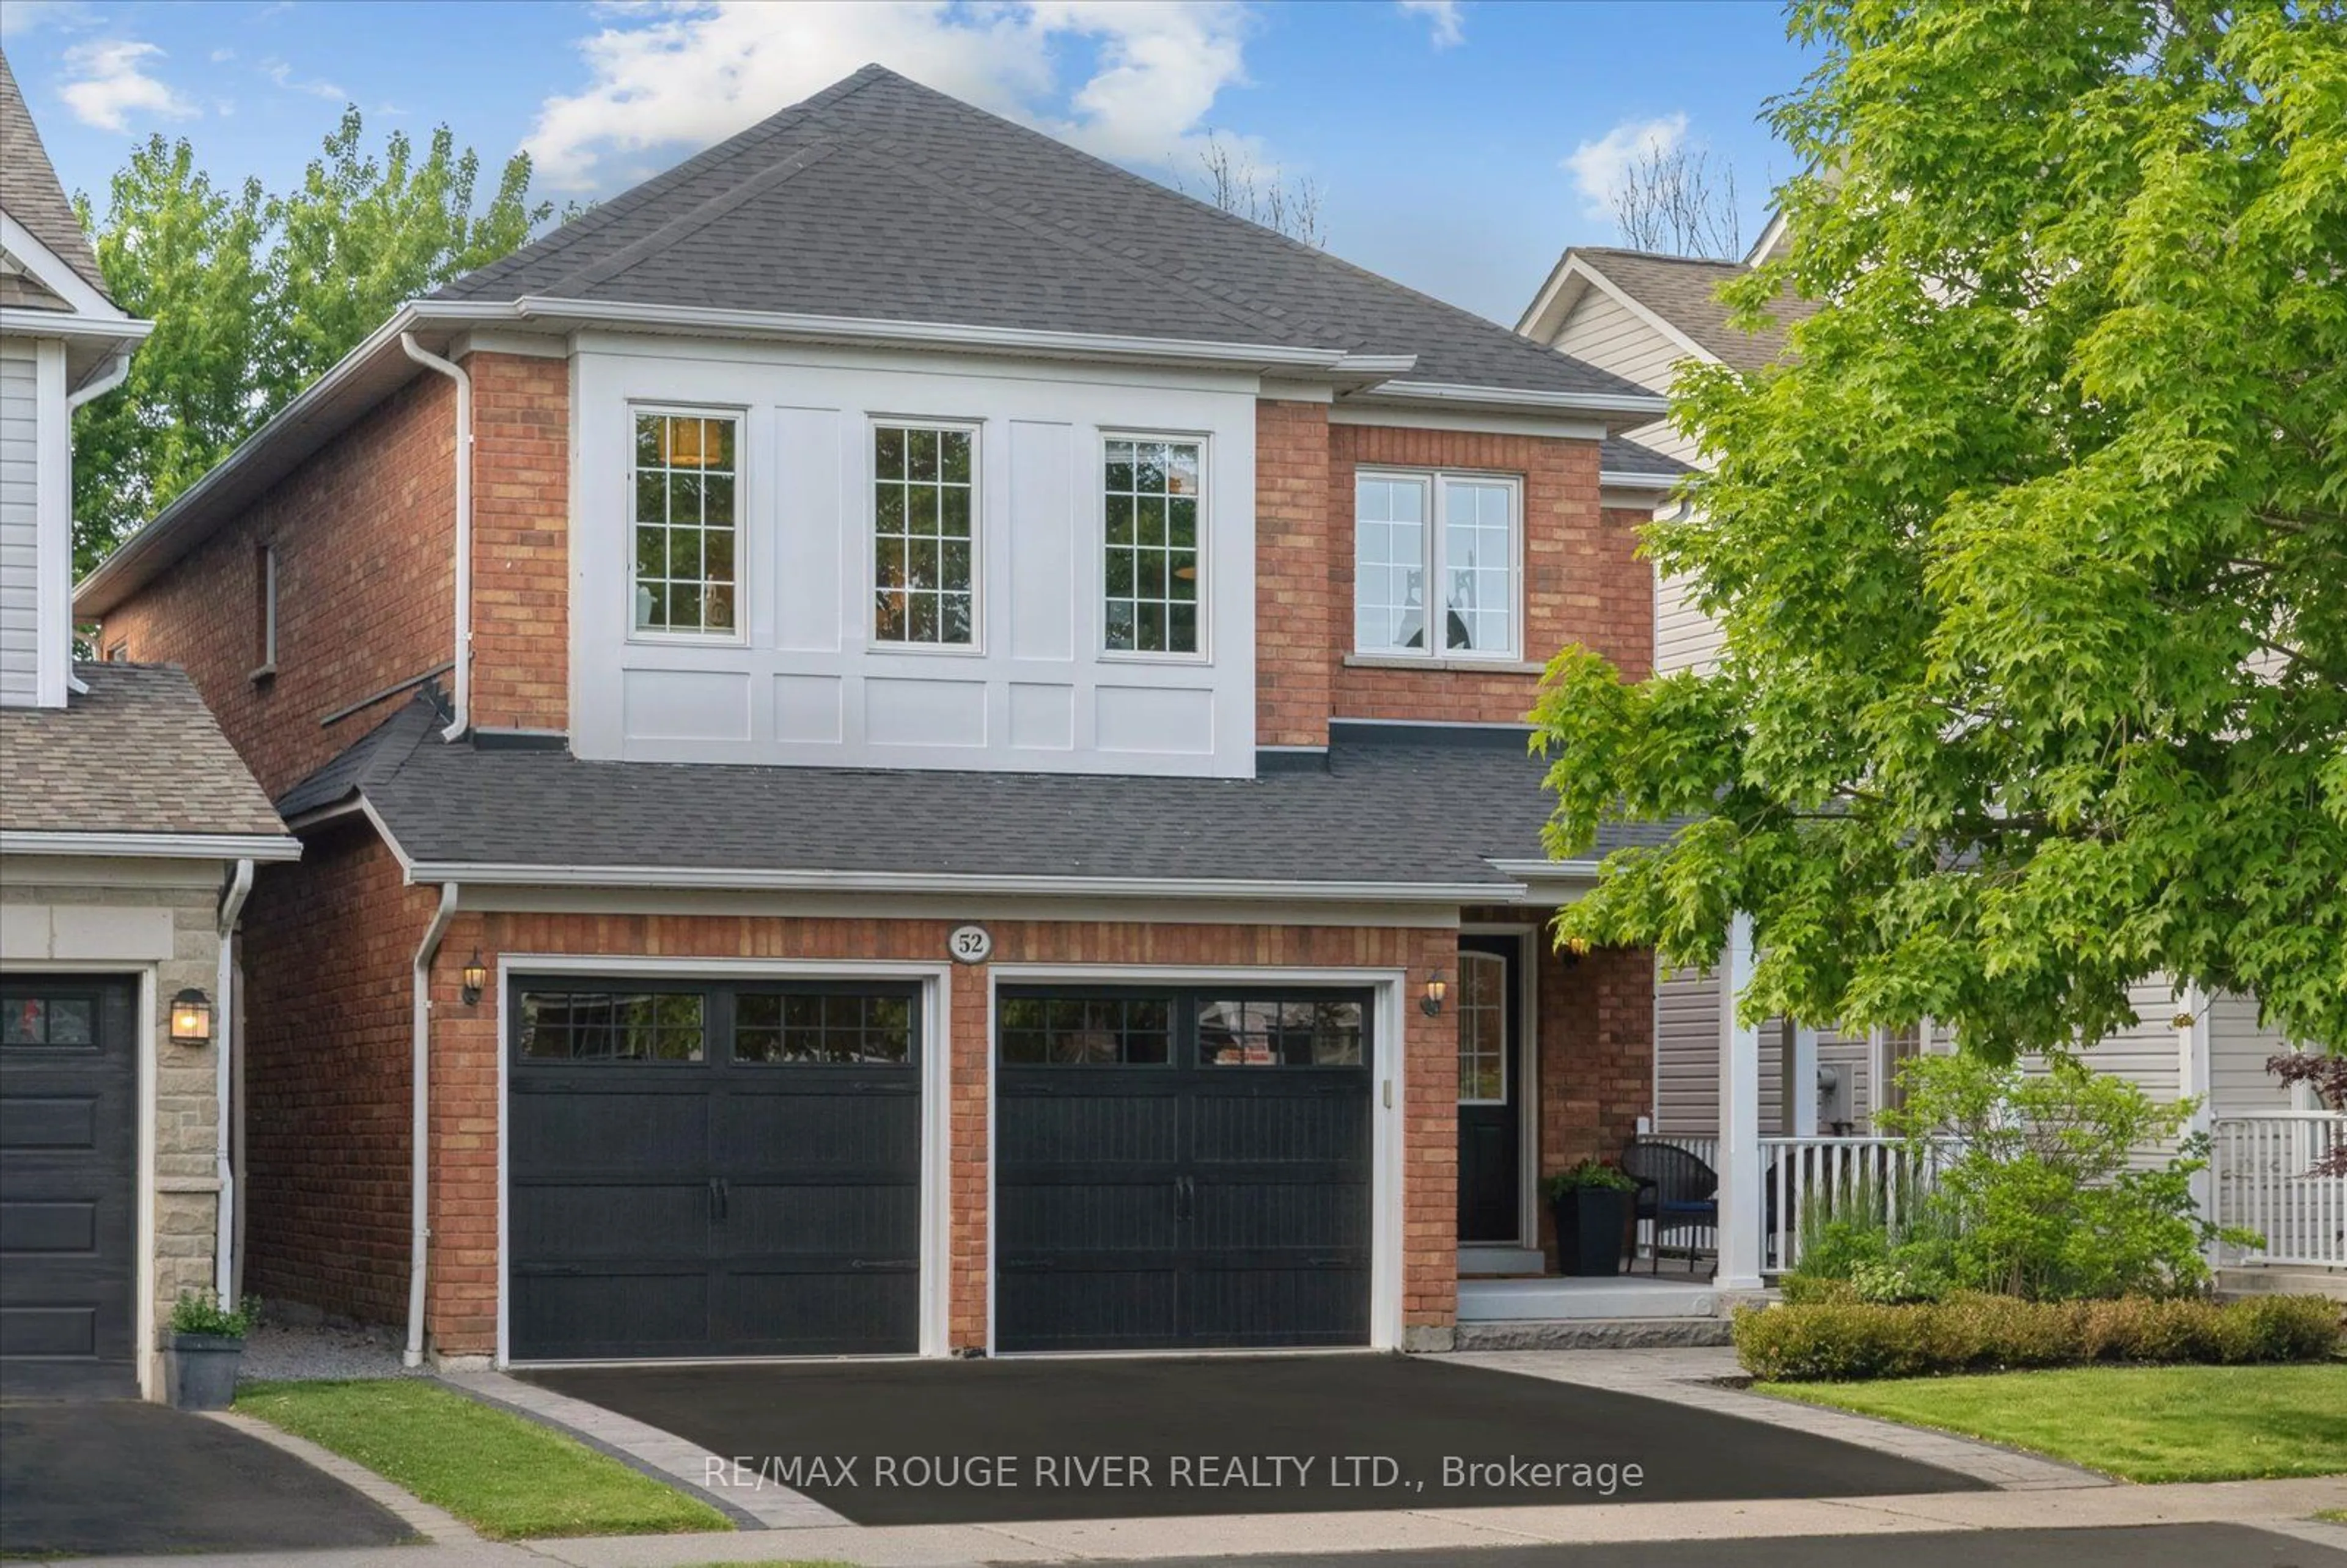 Home with brick exterior material for 52 Warwick Ave, Ajax Ontario L1Z 1K8